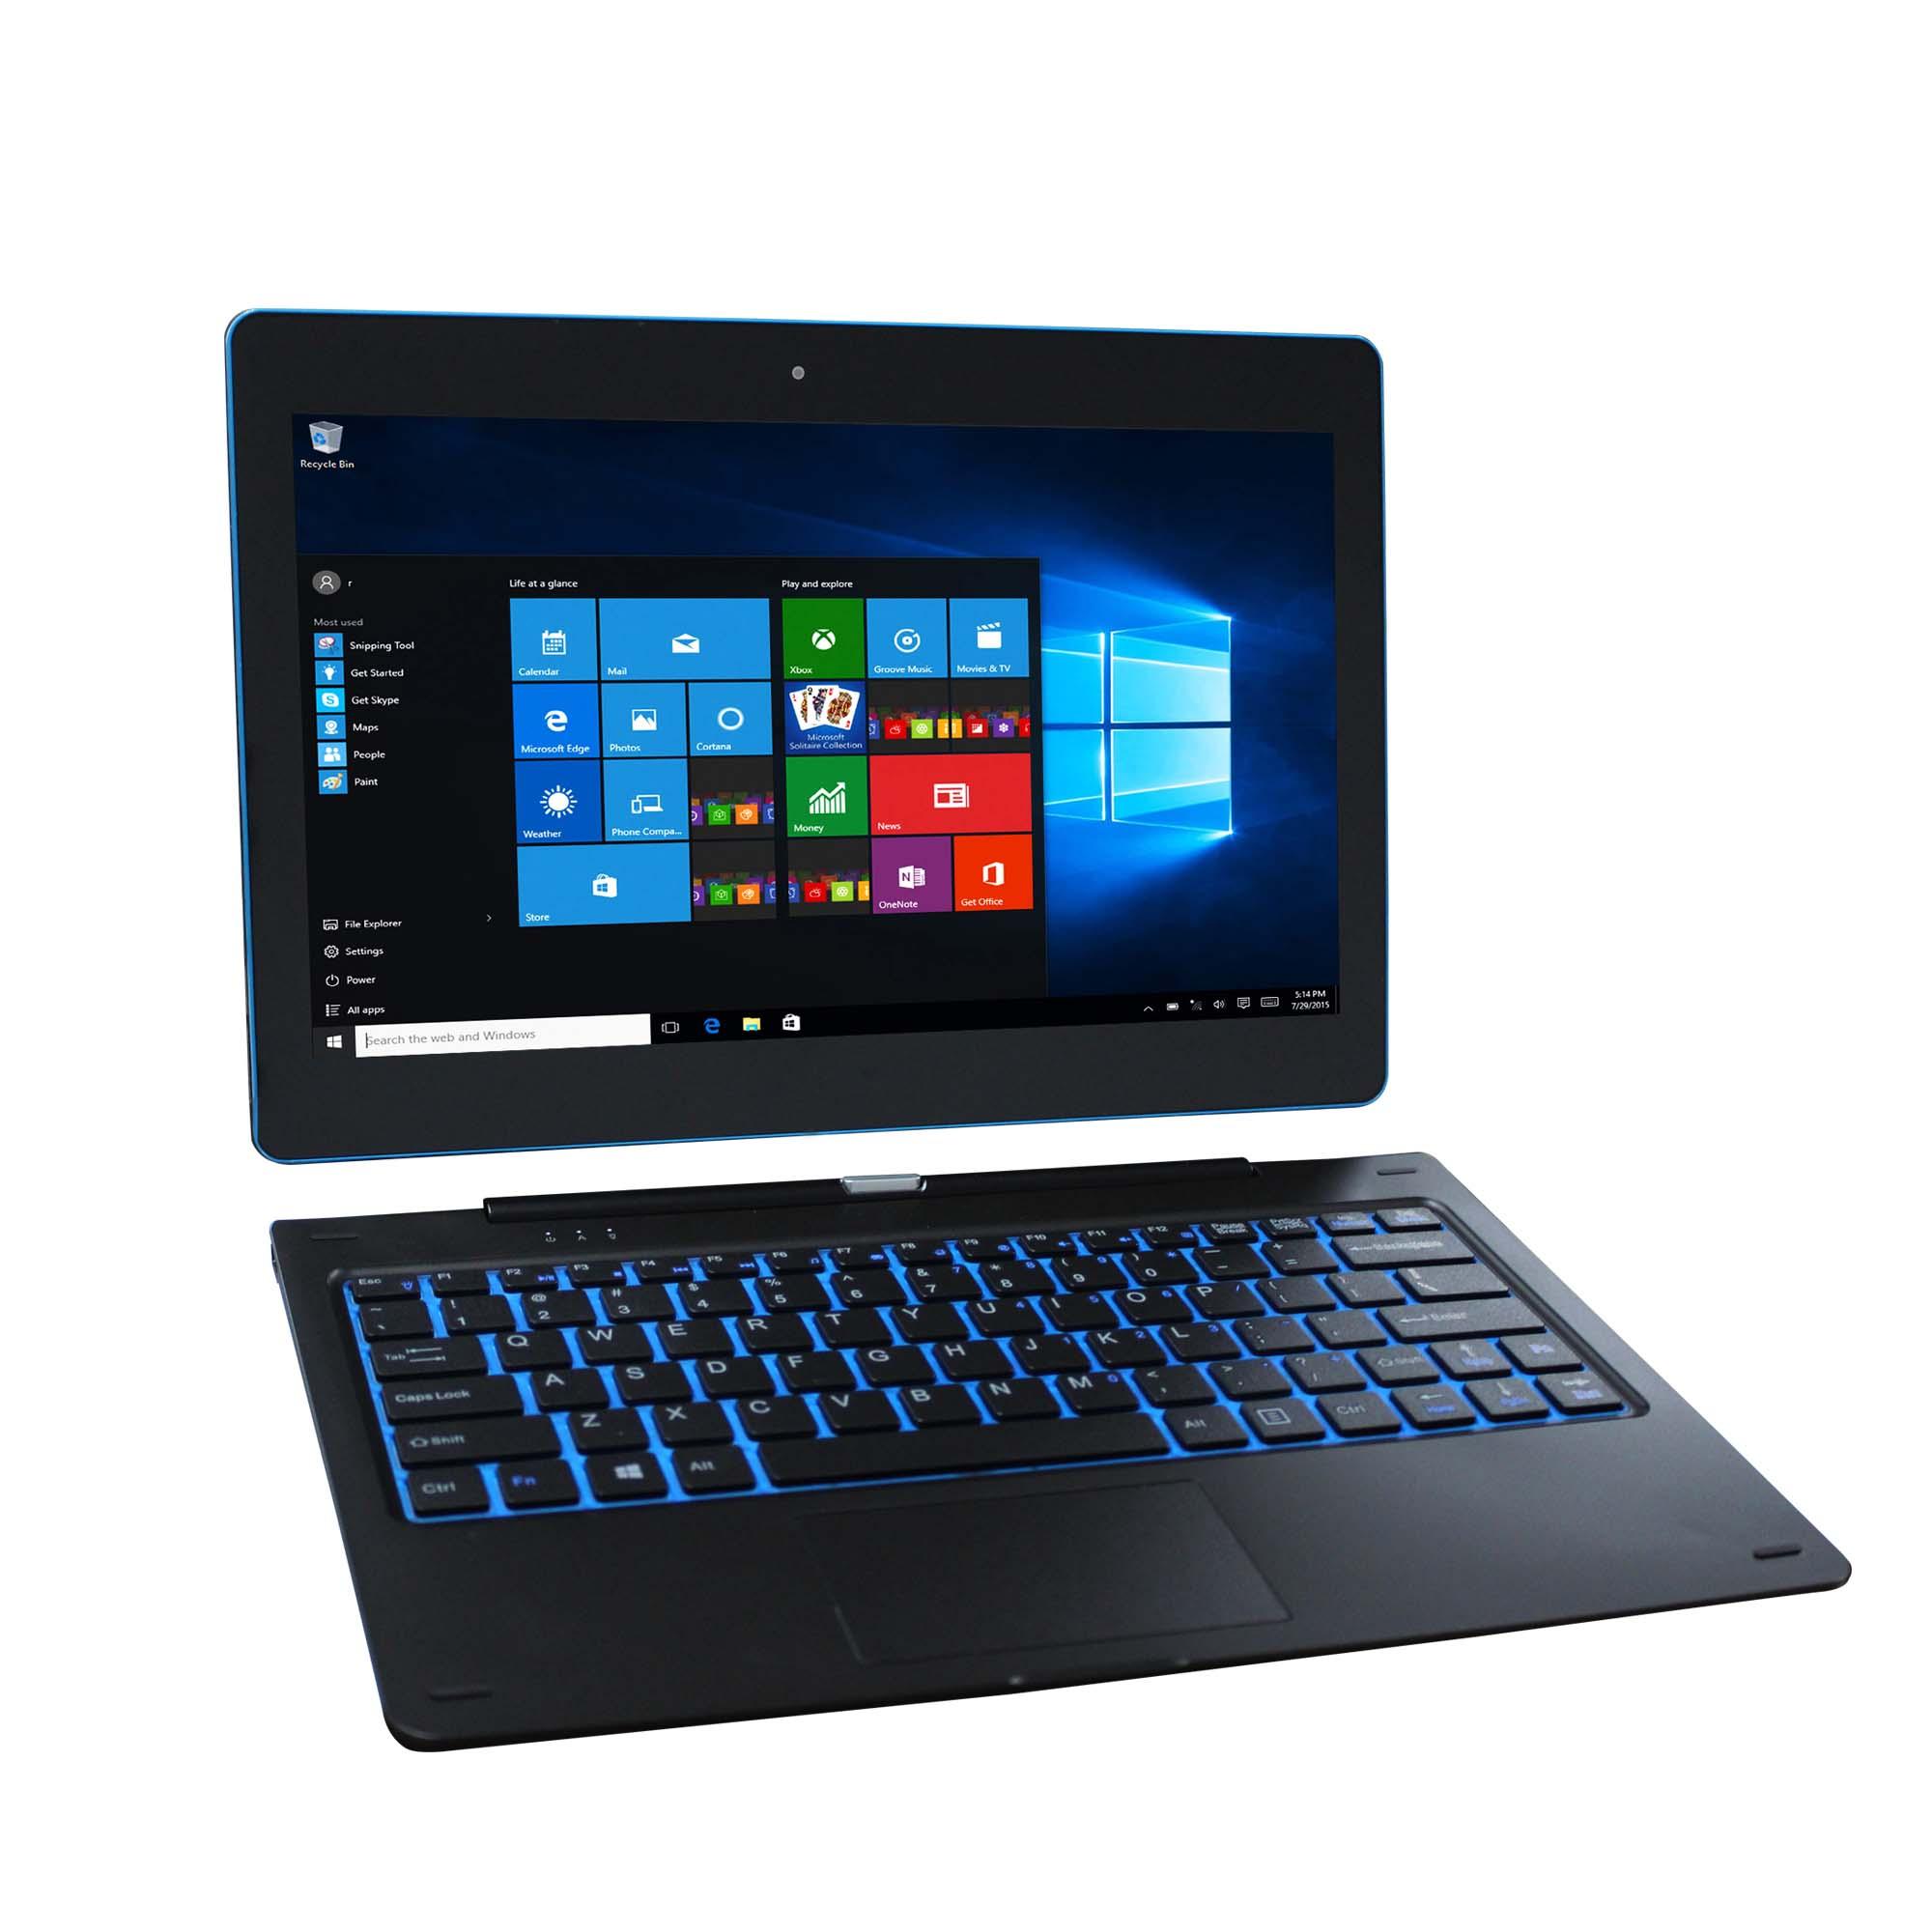 Buy & Sell Cheapest LAPTOP Best Quality Product Deals